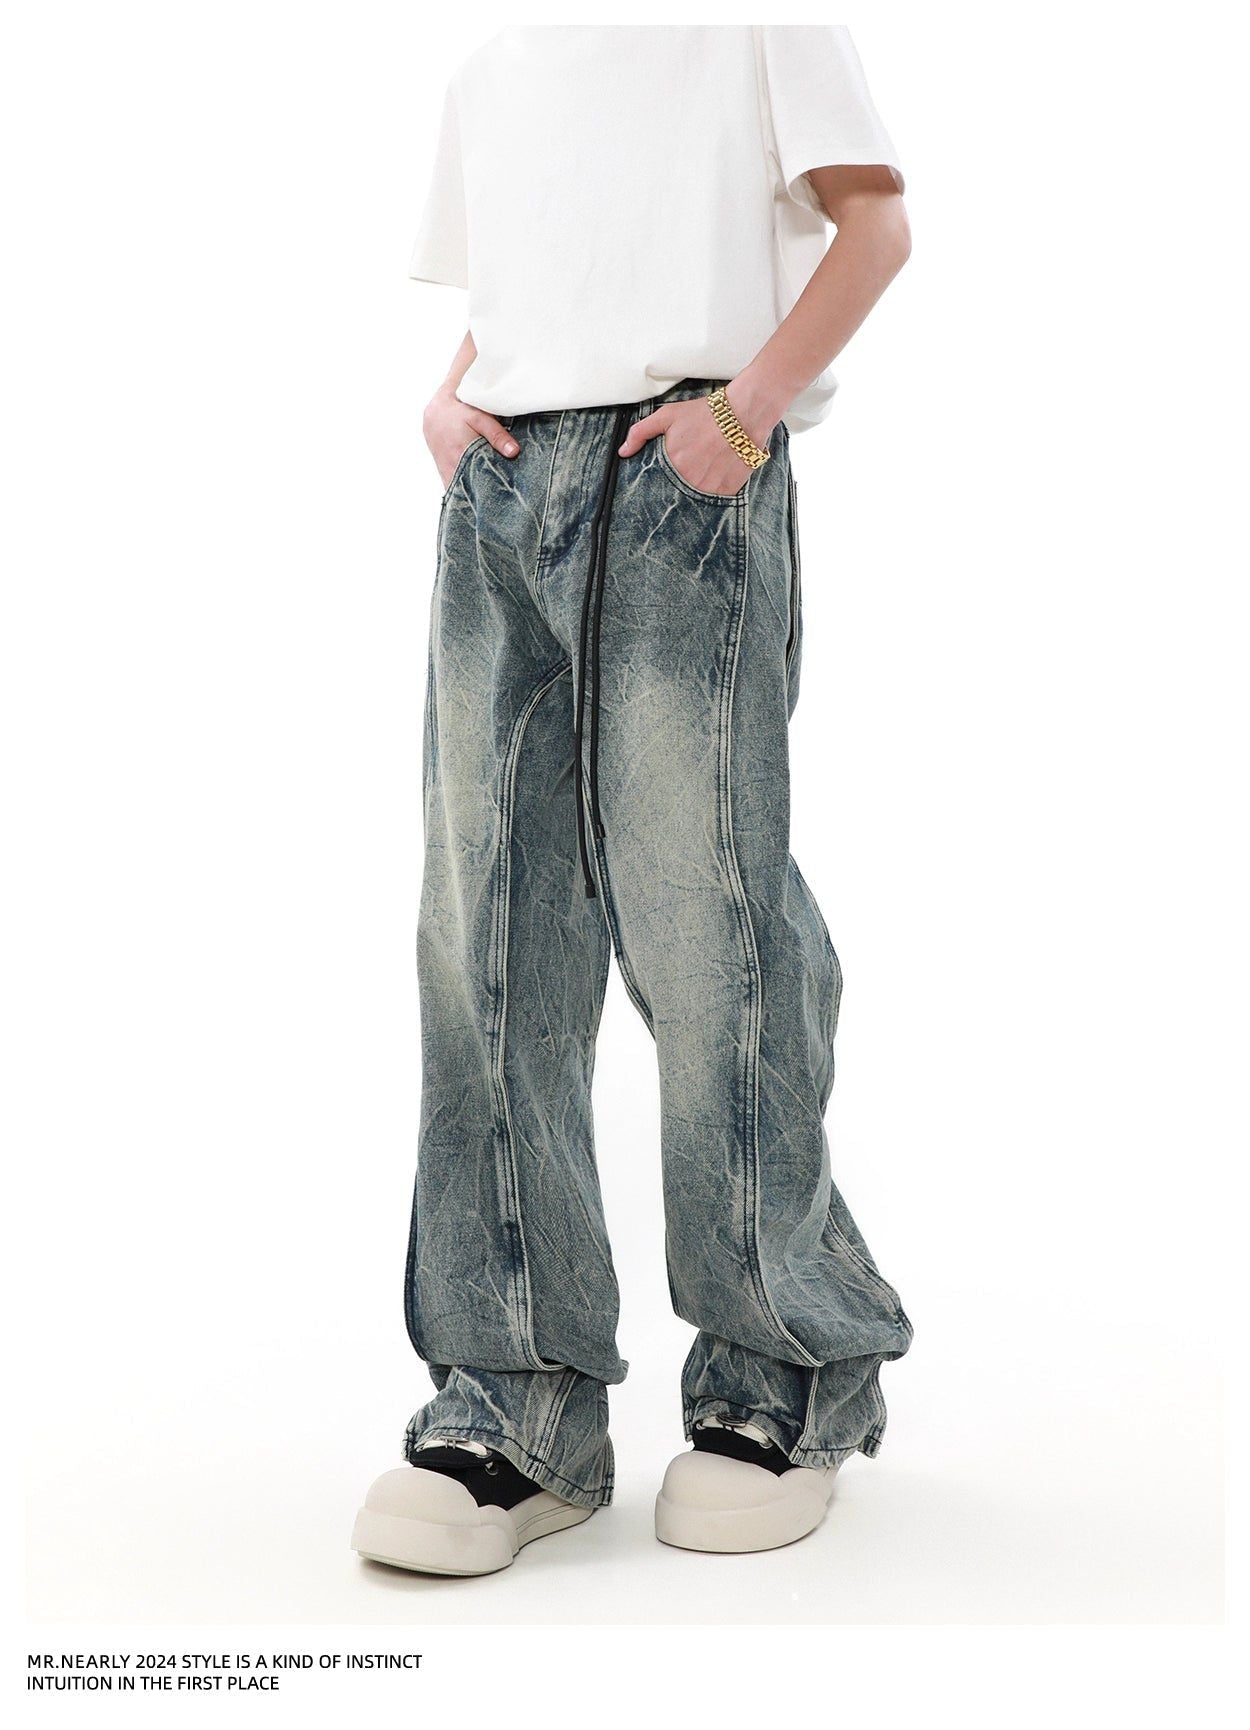 Irregular Wash Stitched Jeans Korean Street Fashion Jeans By Mr Nearly Shop Online at OH Vault